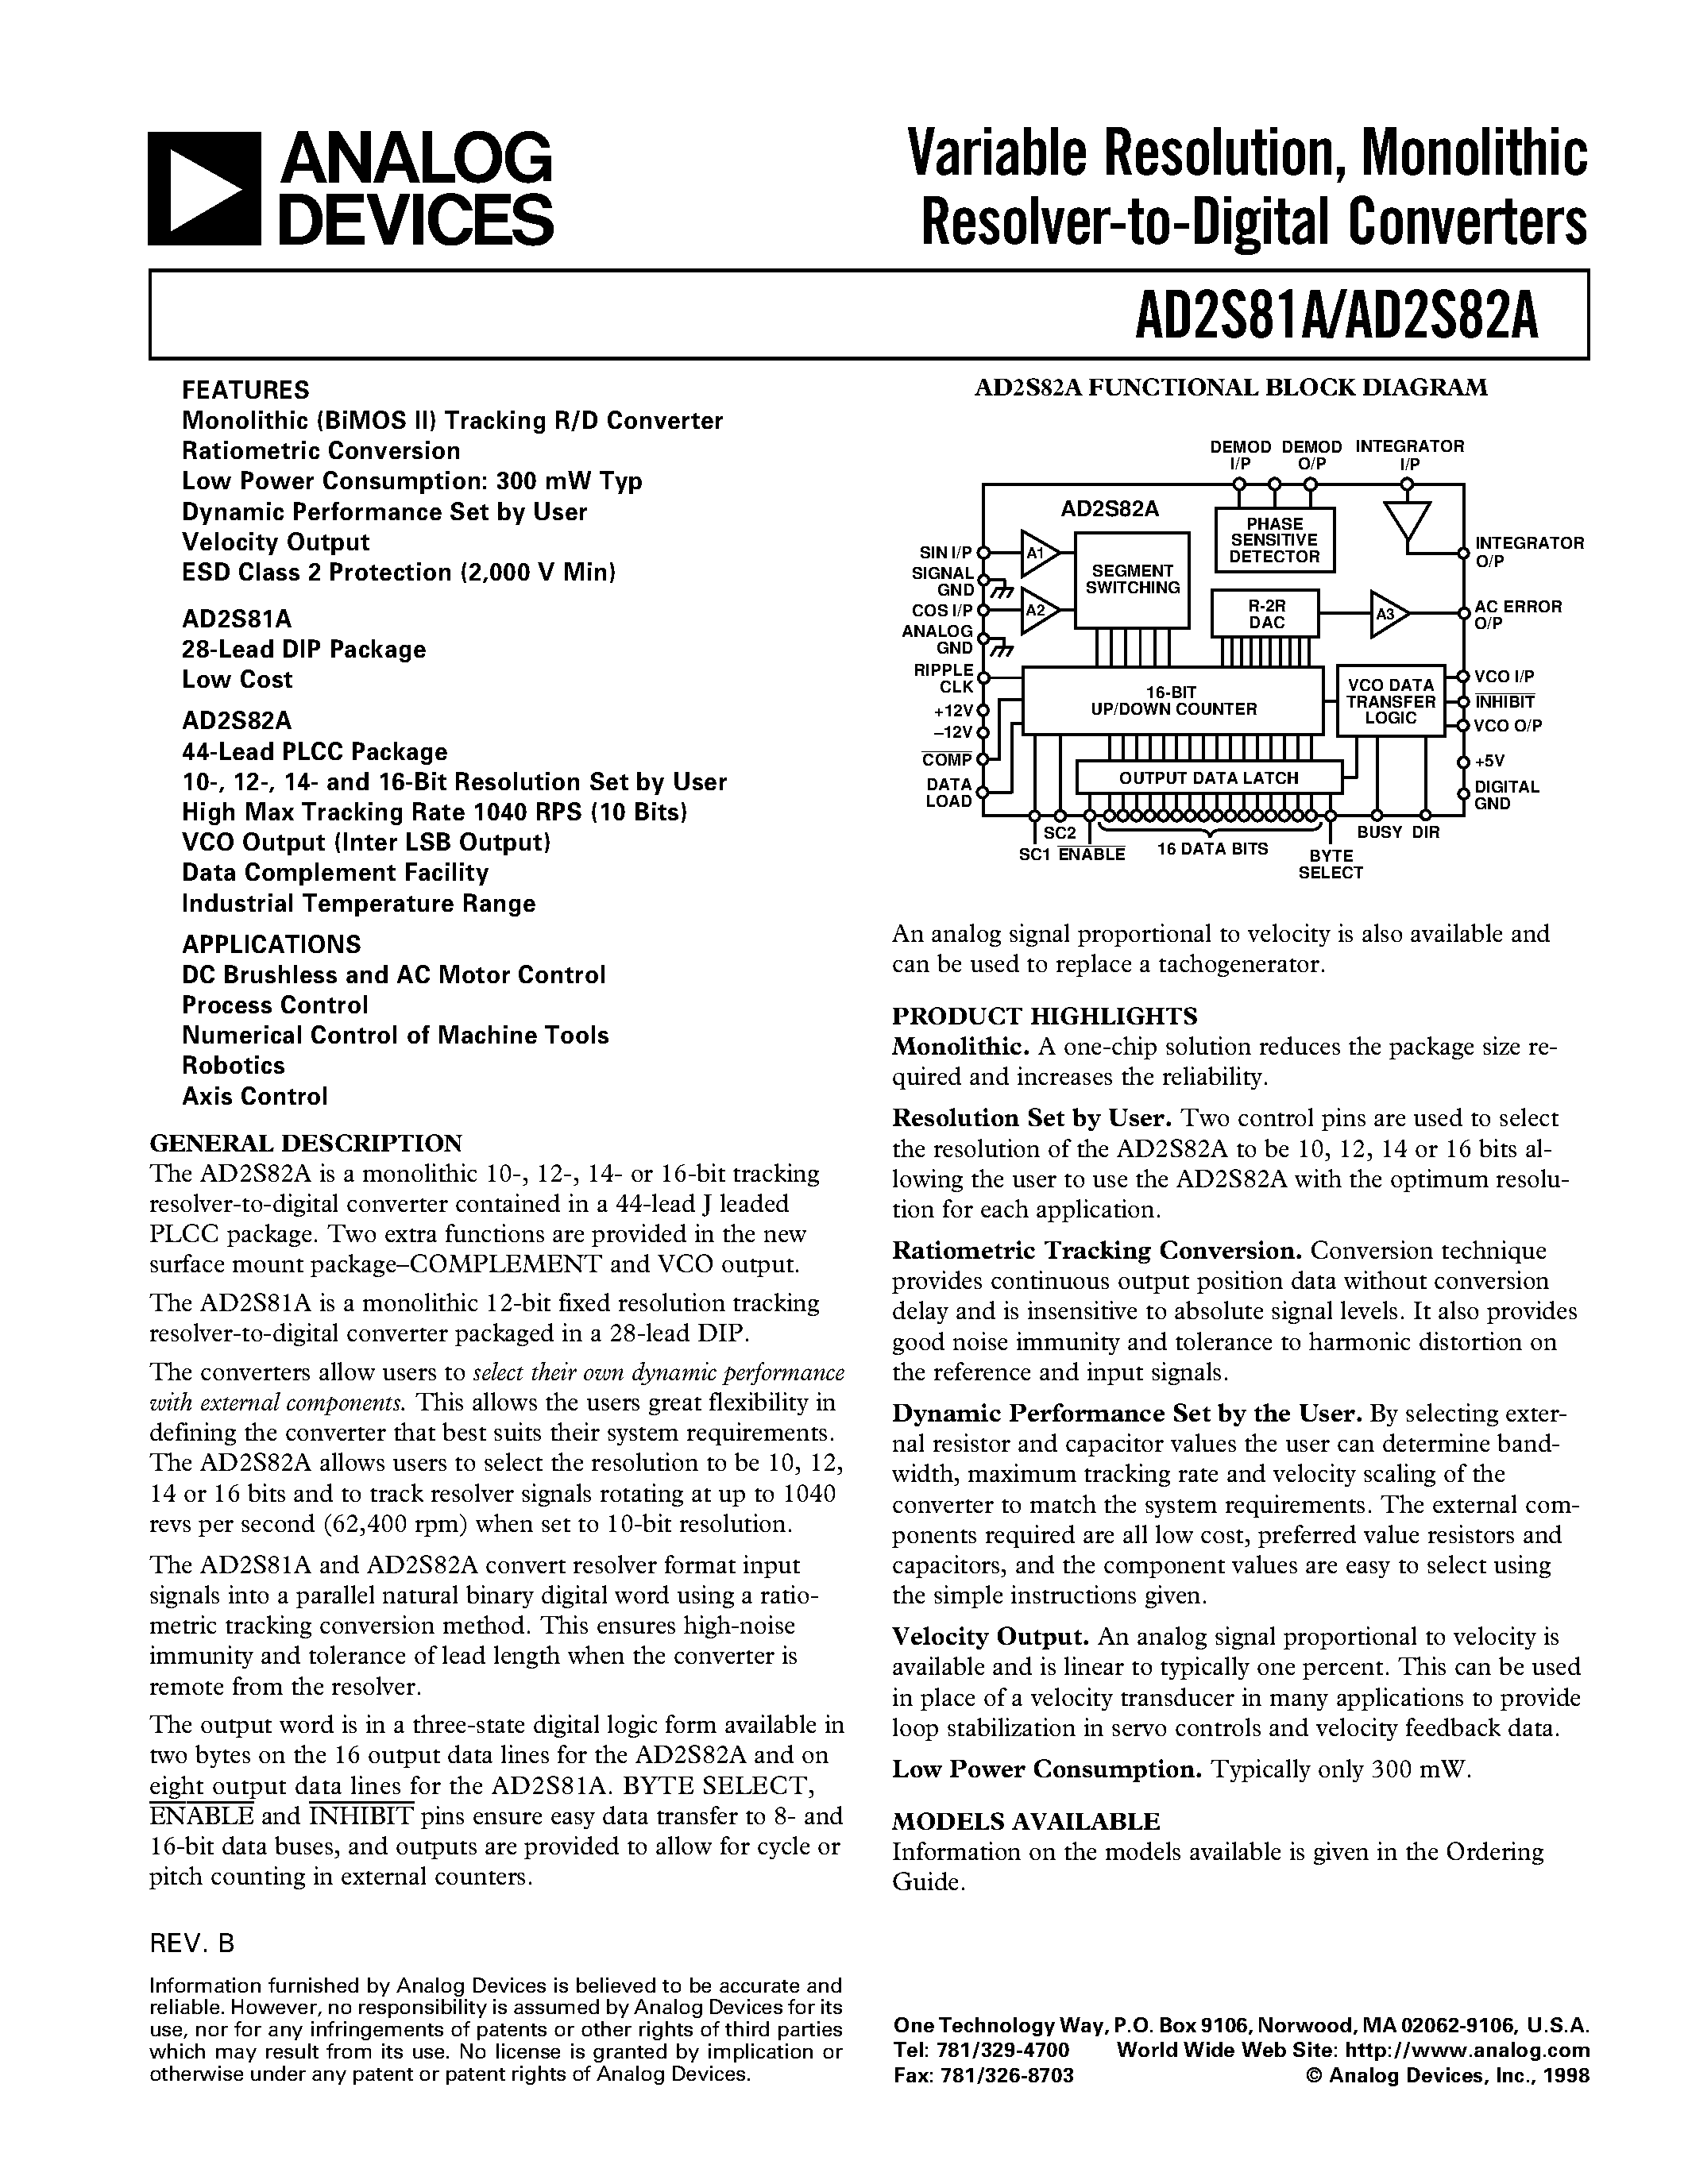 Даташит AD2S82AKP - Variable Resolution/ Monolithic Resolver-to-Digital Converters страница 1